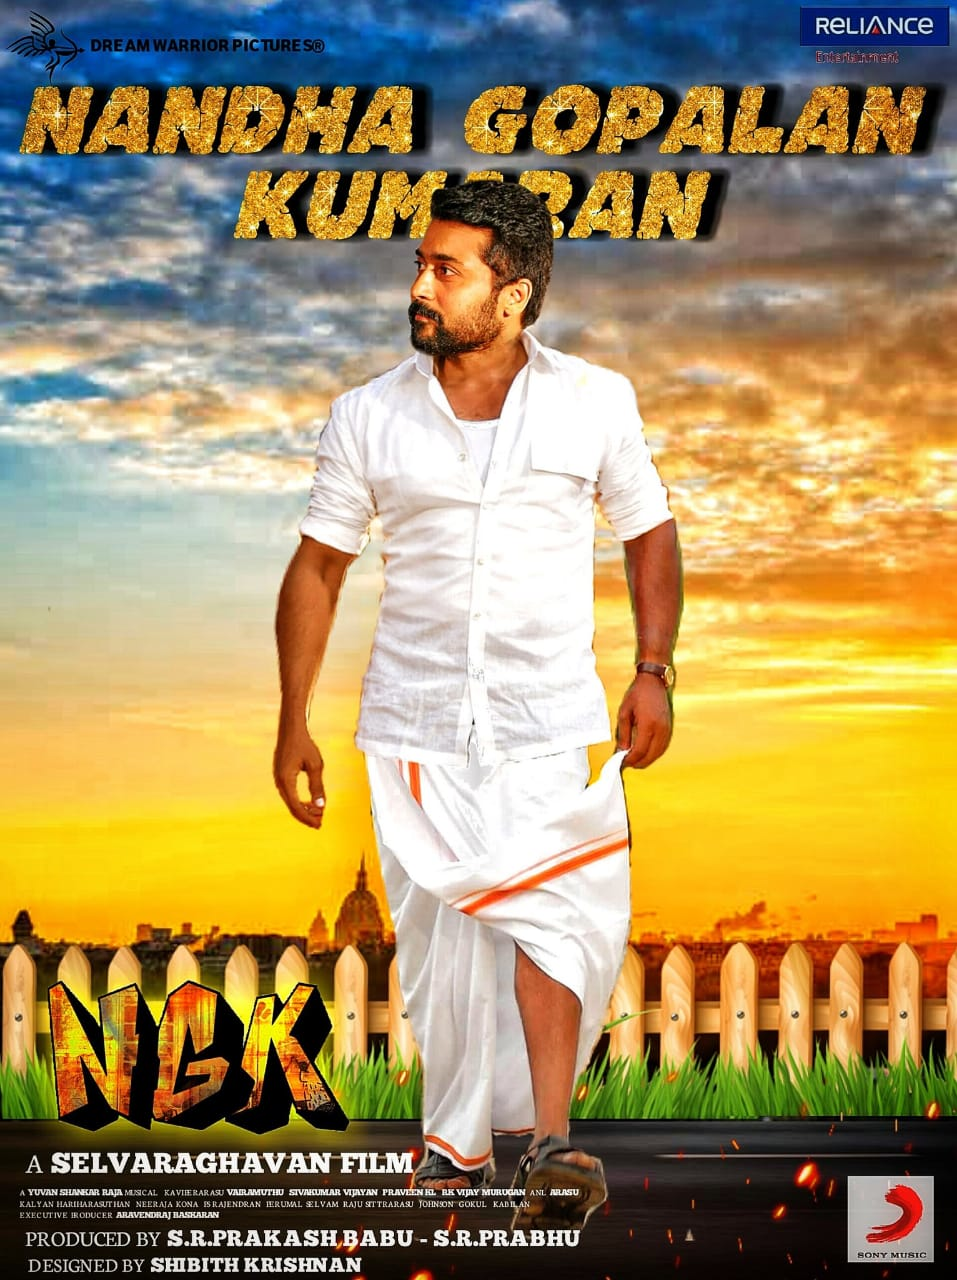 Suriya Act NGK Movie Latest Poster. Latest Indian Hollywood Movies Updates, Branding Online and Actress Gallery